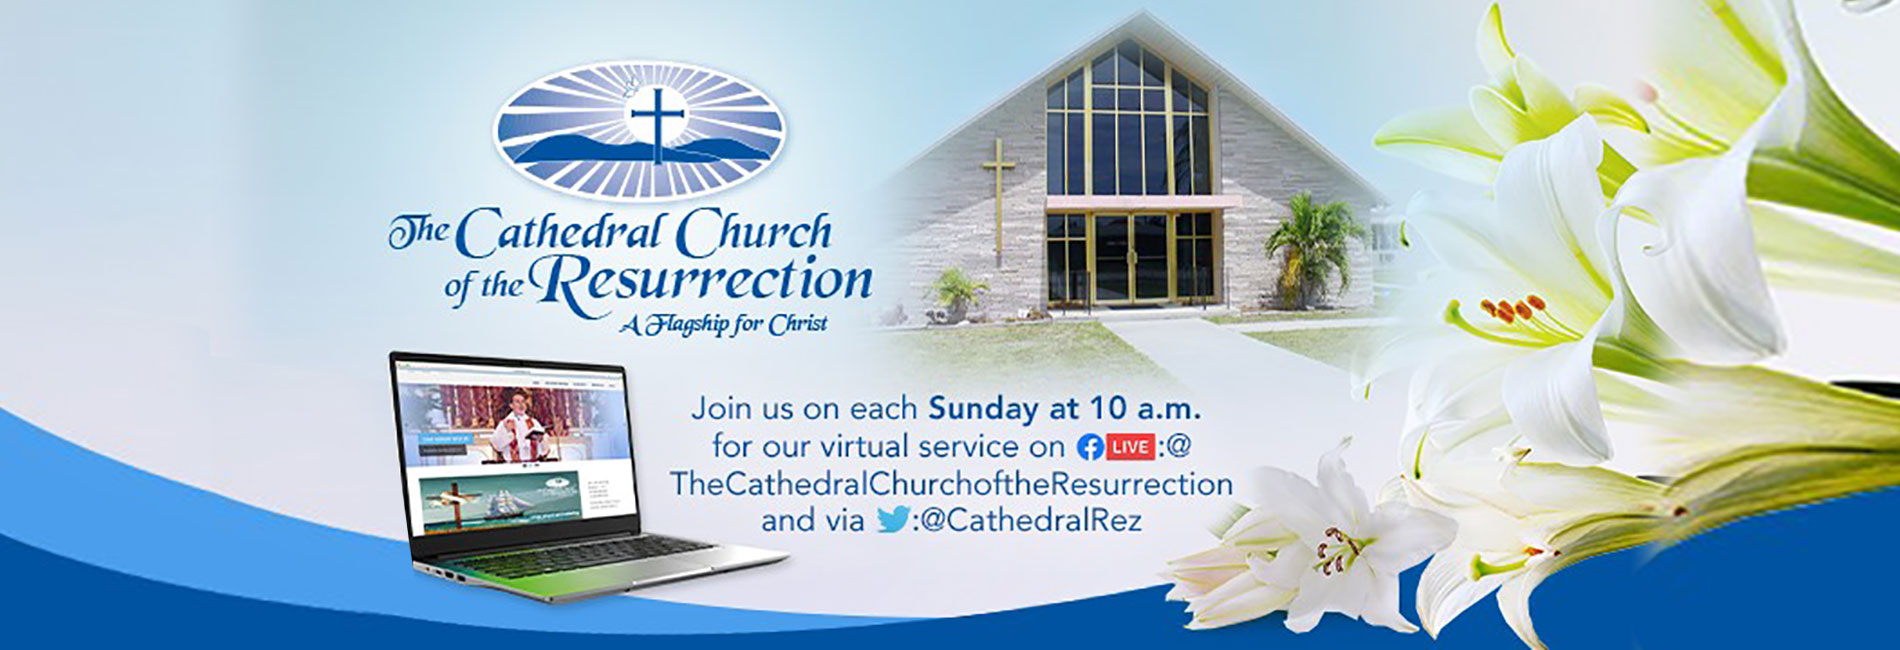 Join us each Sunday at 10 a.m. for our virtual service